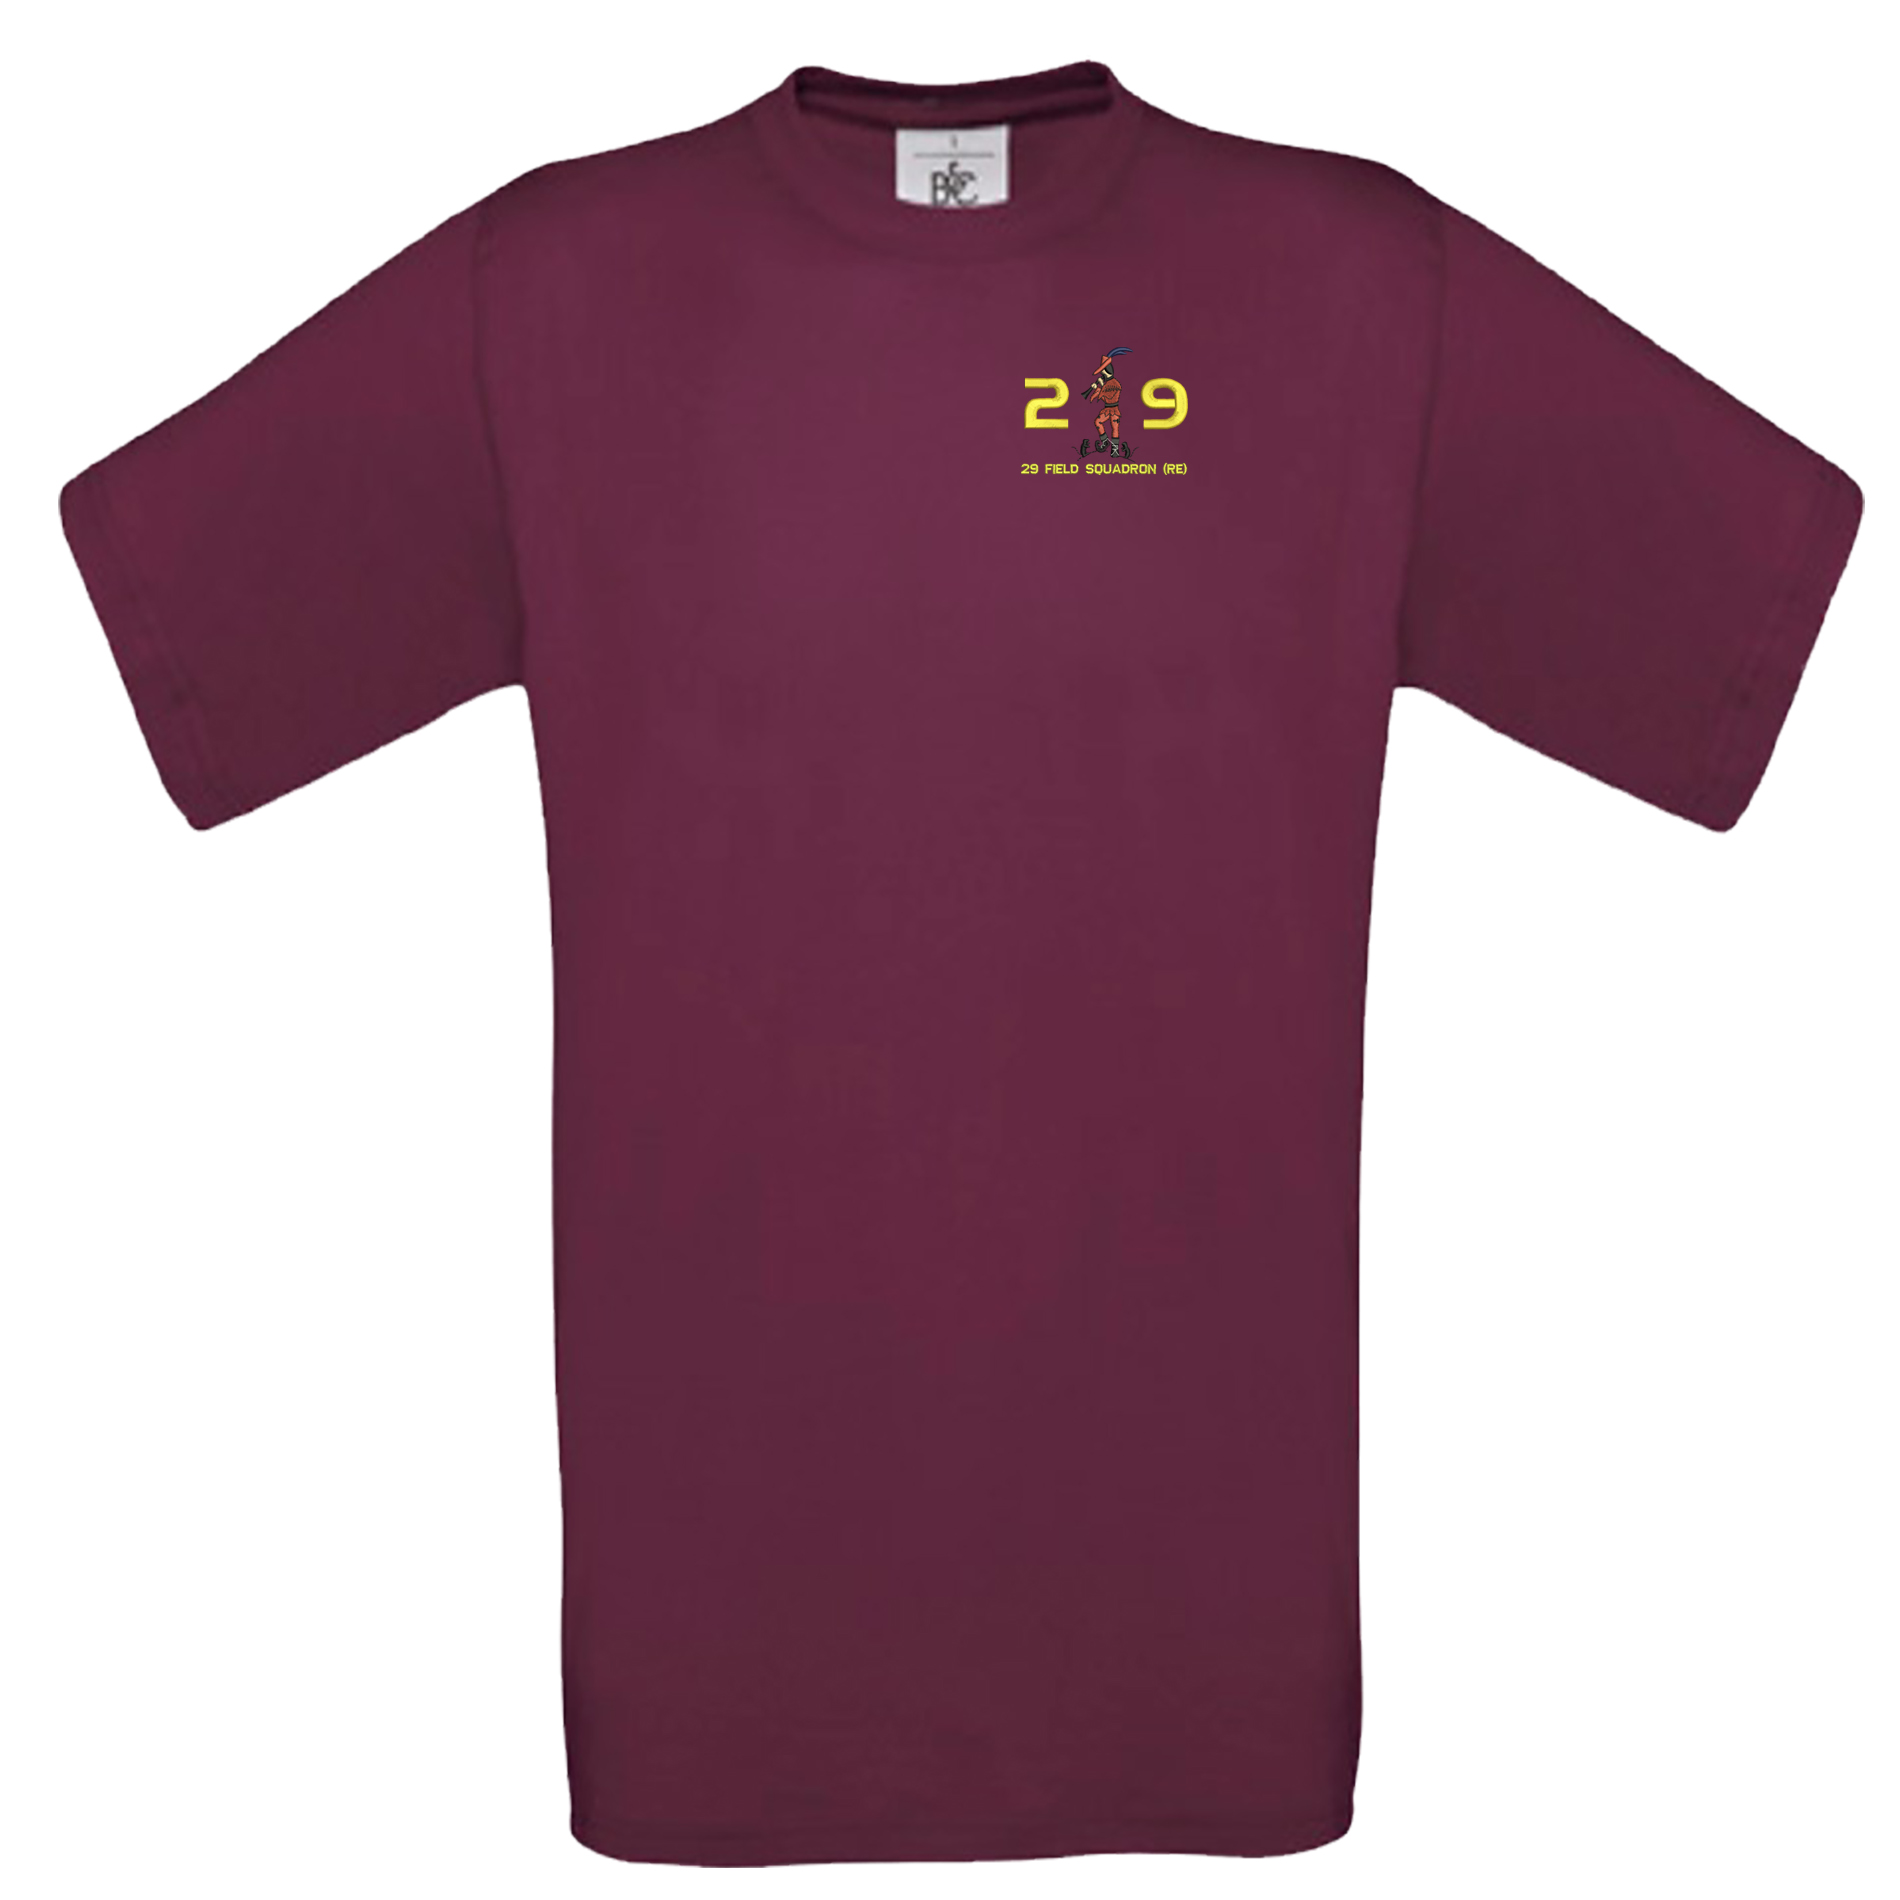 29 Fld Sqn Embroidered T-shirt